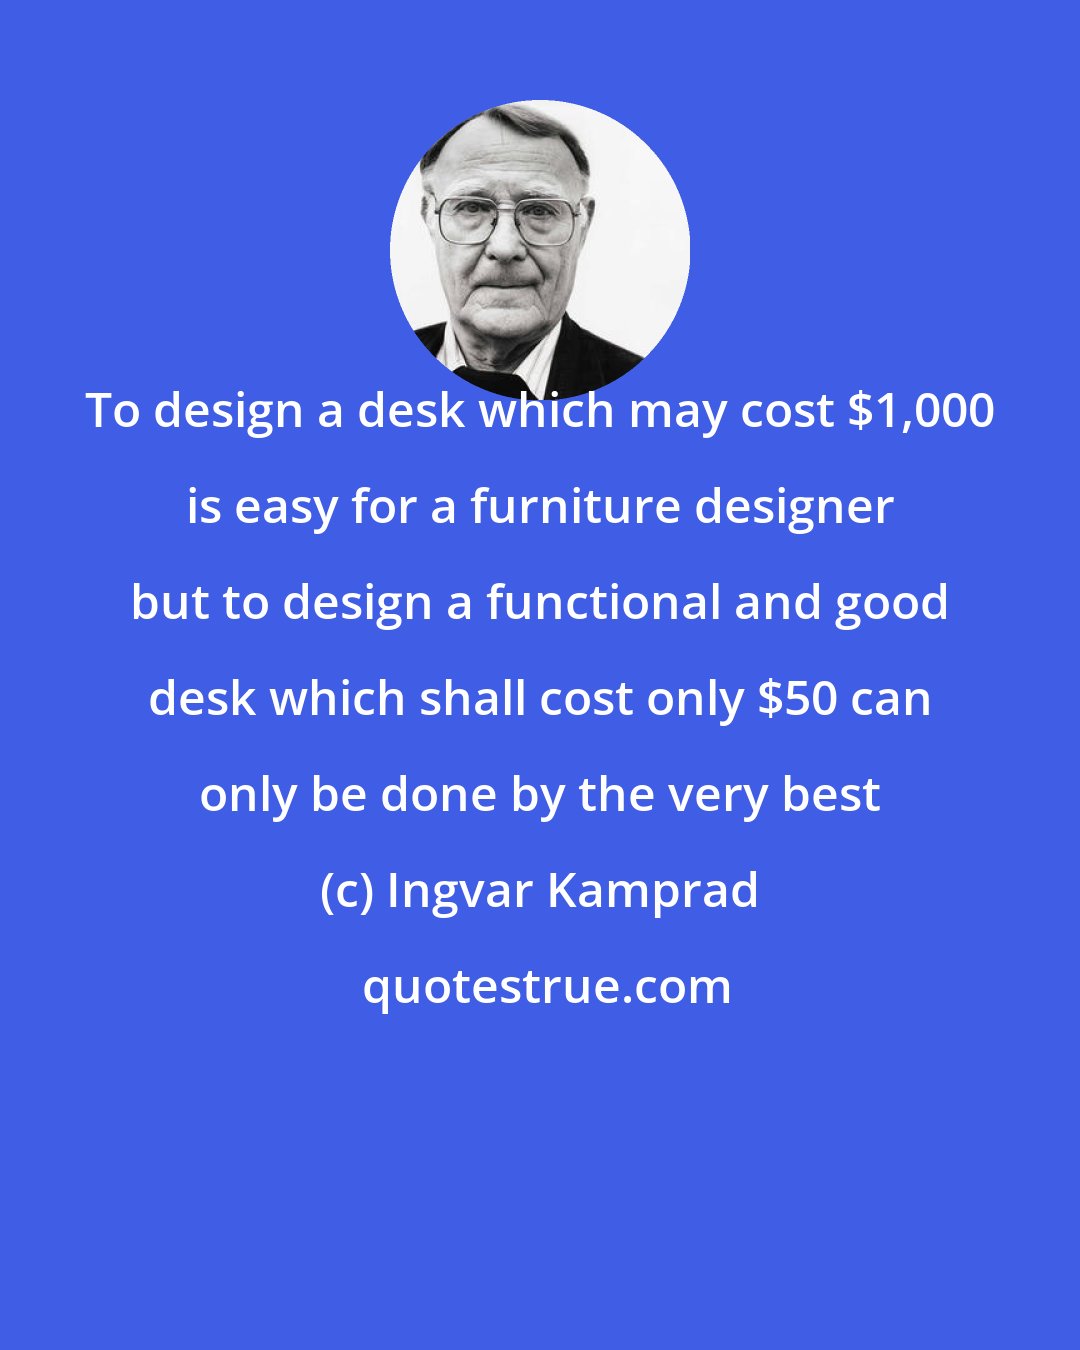 Ingvar Kamprad: To design a desk which may cost $1,000 is easy for a furniture designer but to design a functional and good desk which shall cost only $50 can only be done by the very best